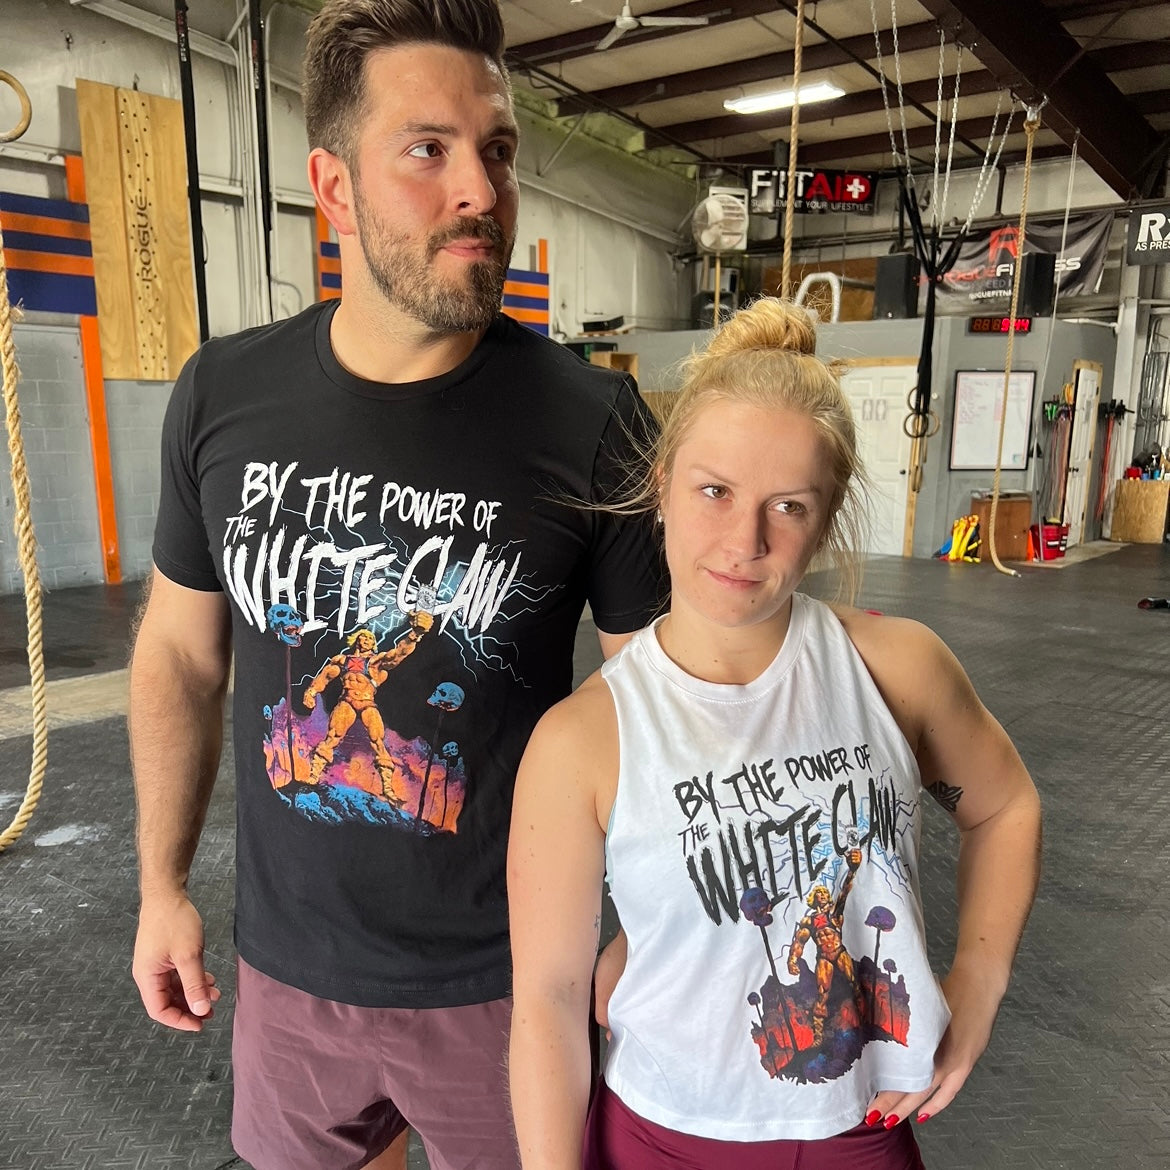 "By the Power of White Claw" - Women’s Crop tank